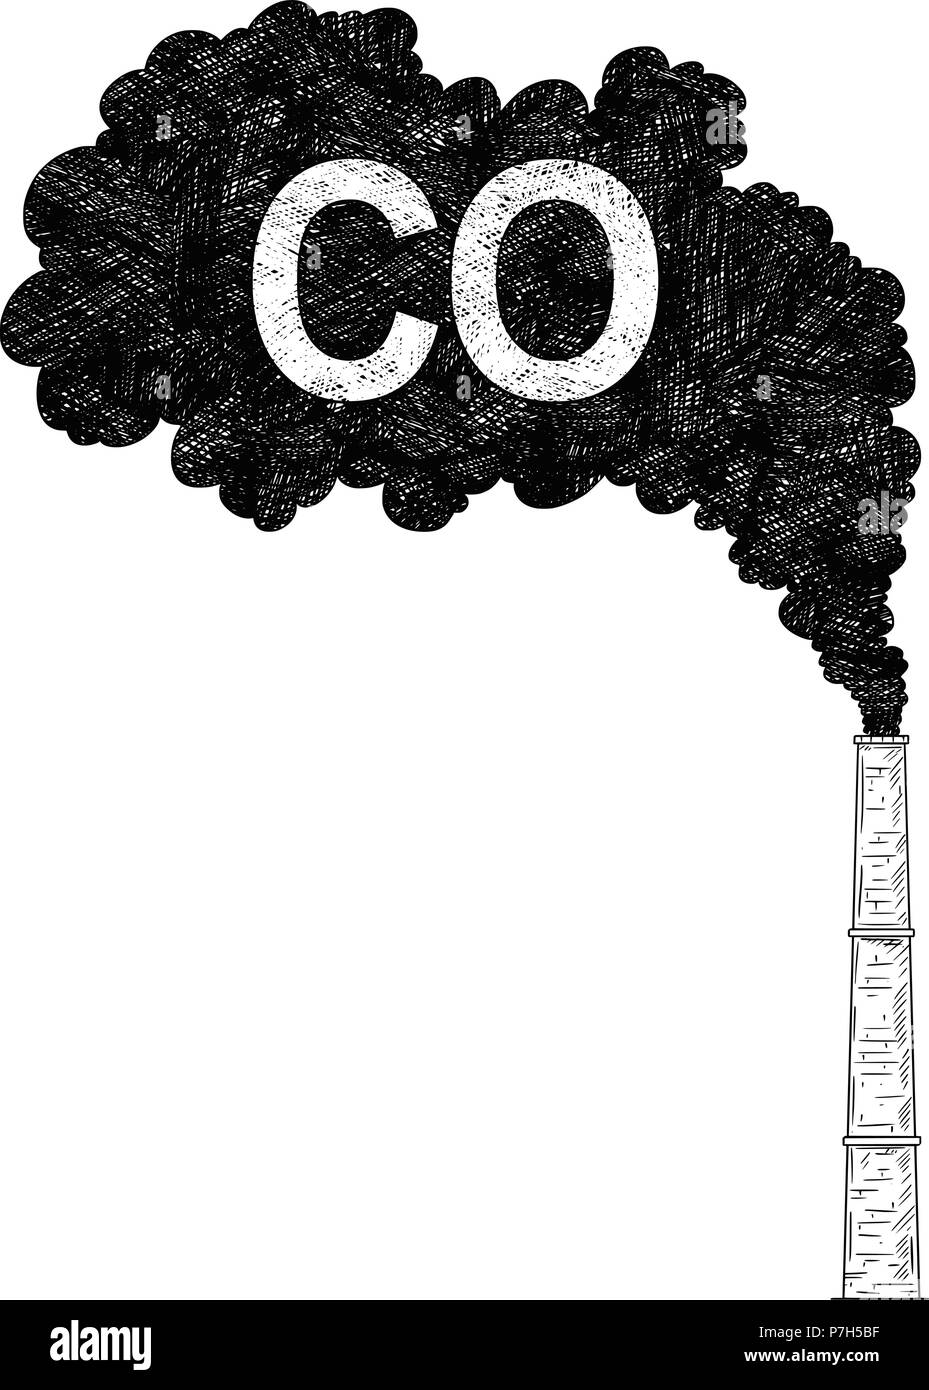 Vector Artistic Drawing Illustration of Smokestack, Industry or Factory Air CO Pollution Stock Vector